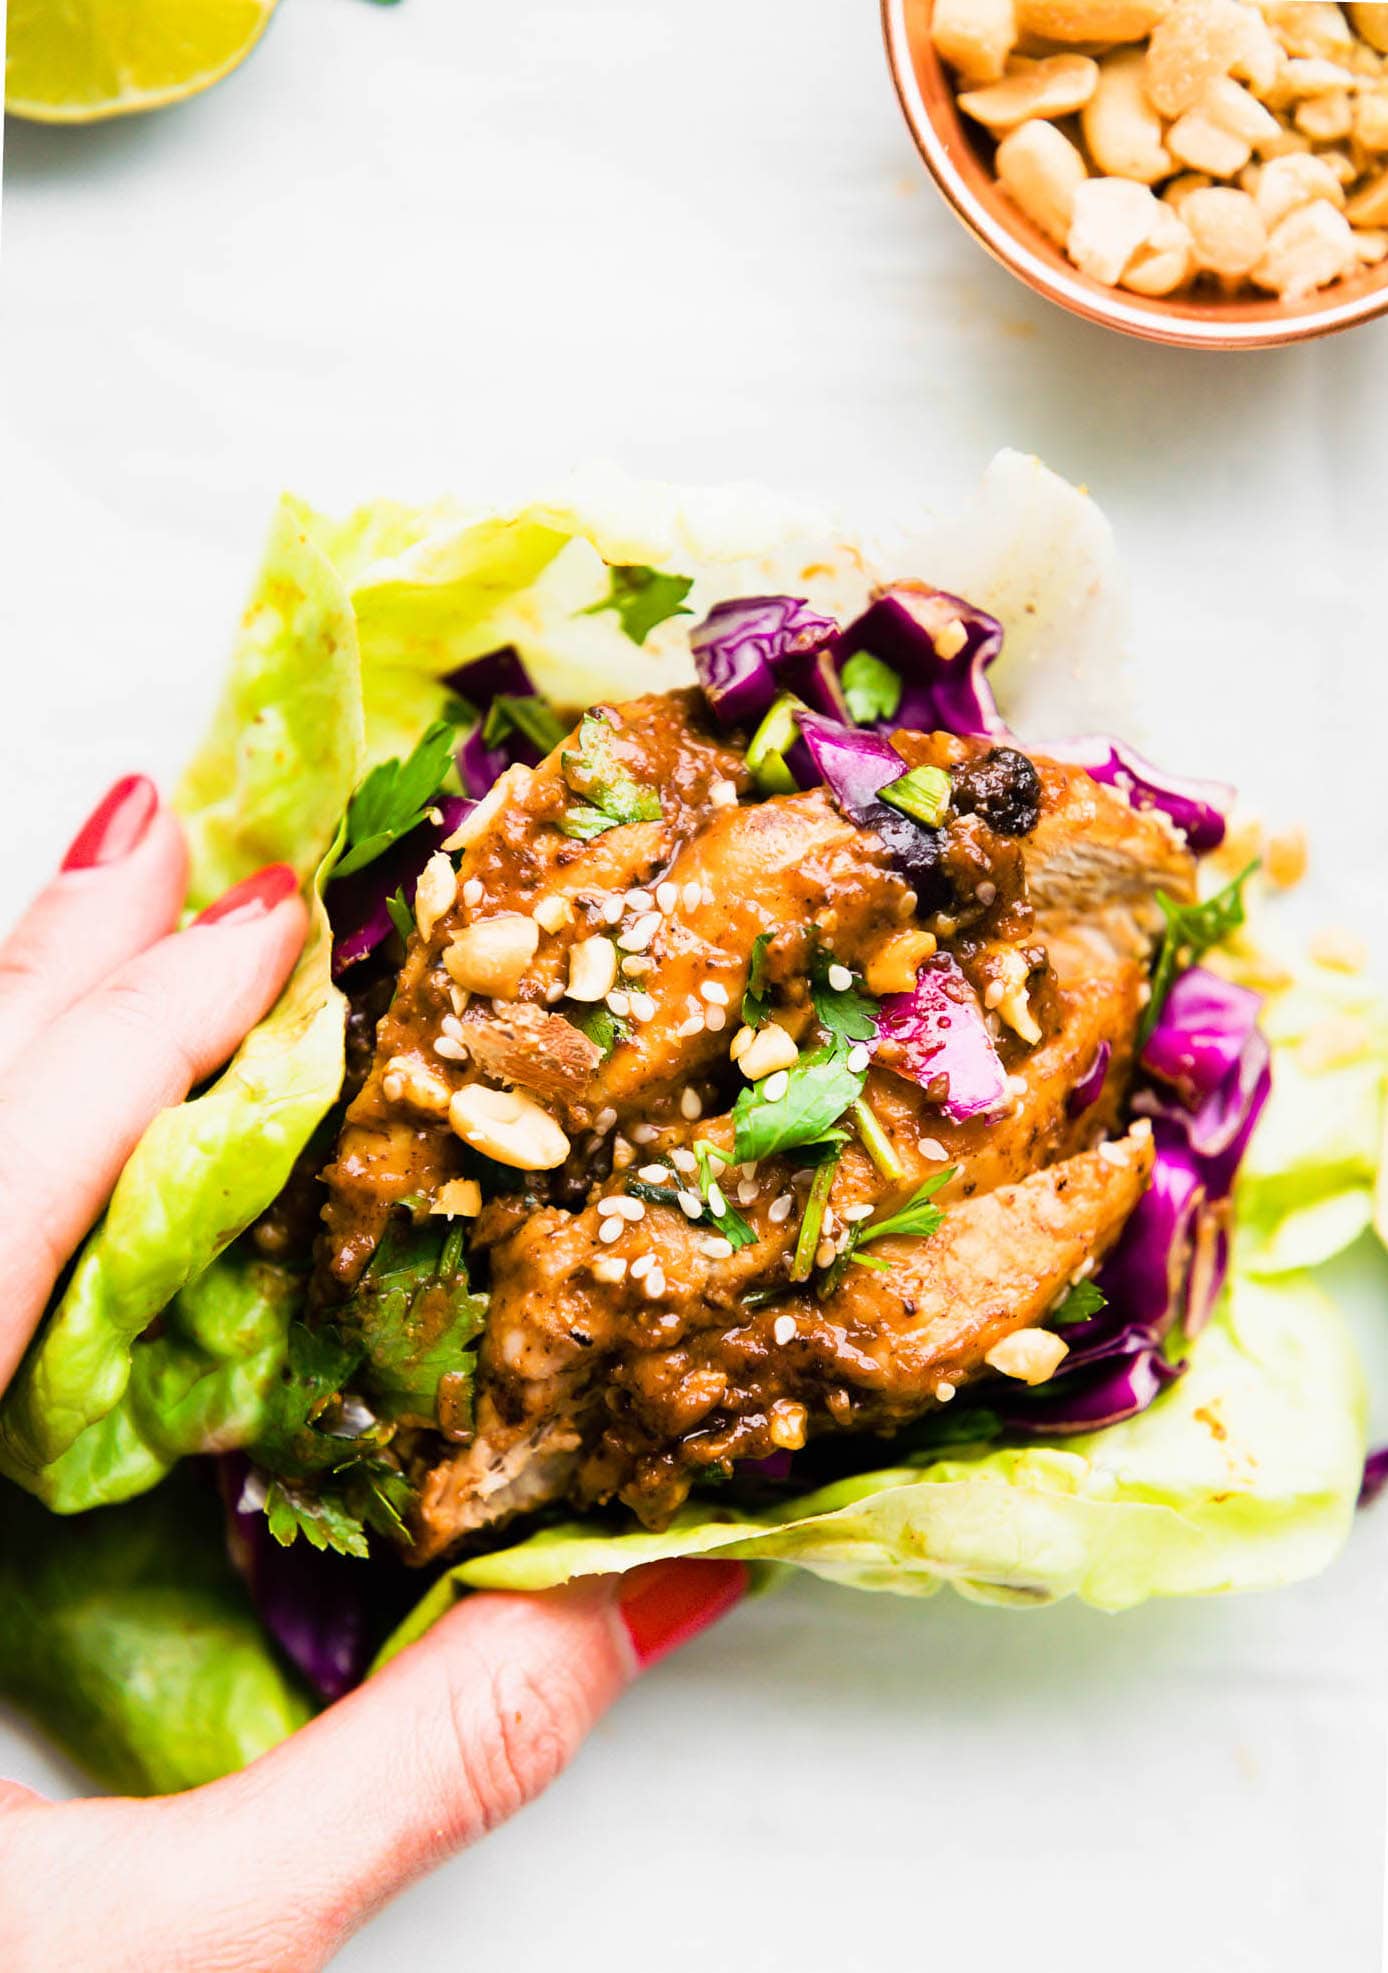 A hand holding a lettuce wrap filled with sticky bbq pork topped with purple cabbage, nuts, and sesame seeds.